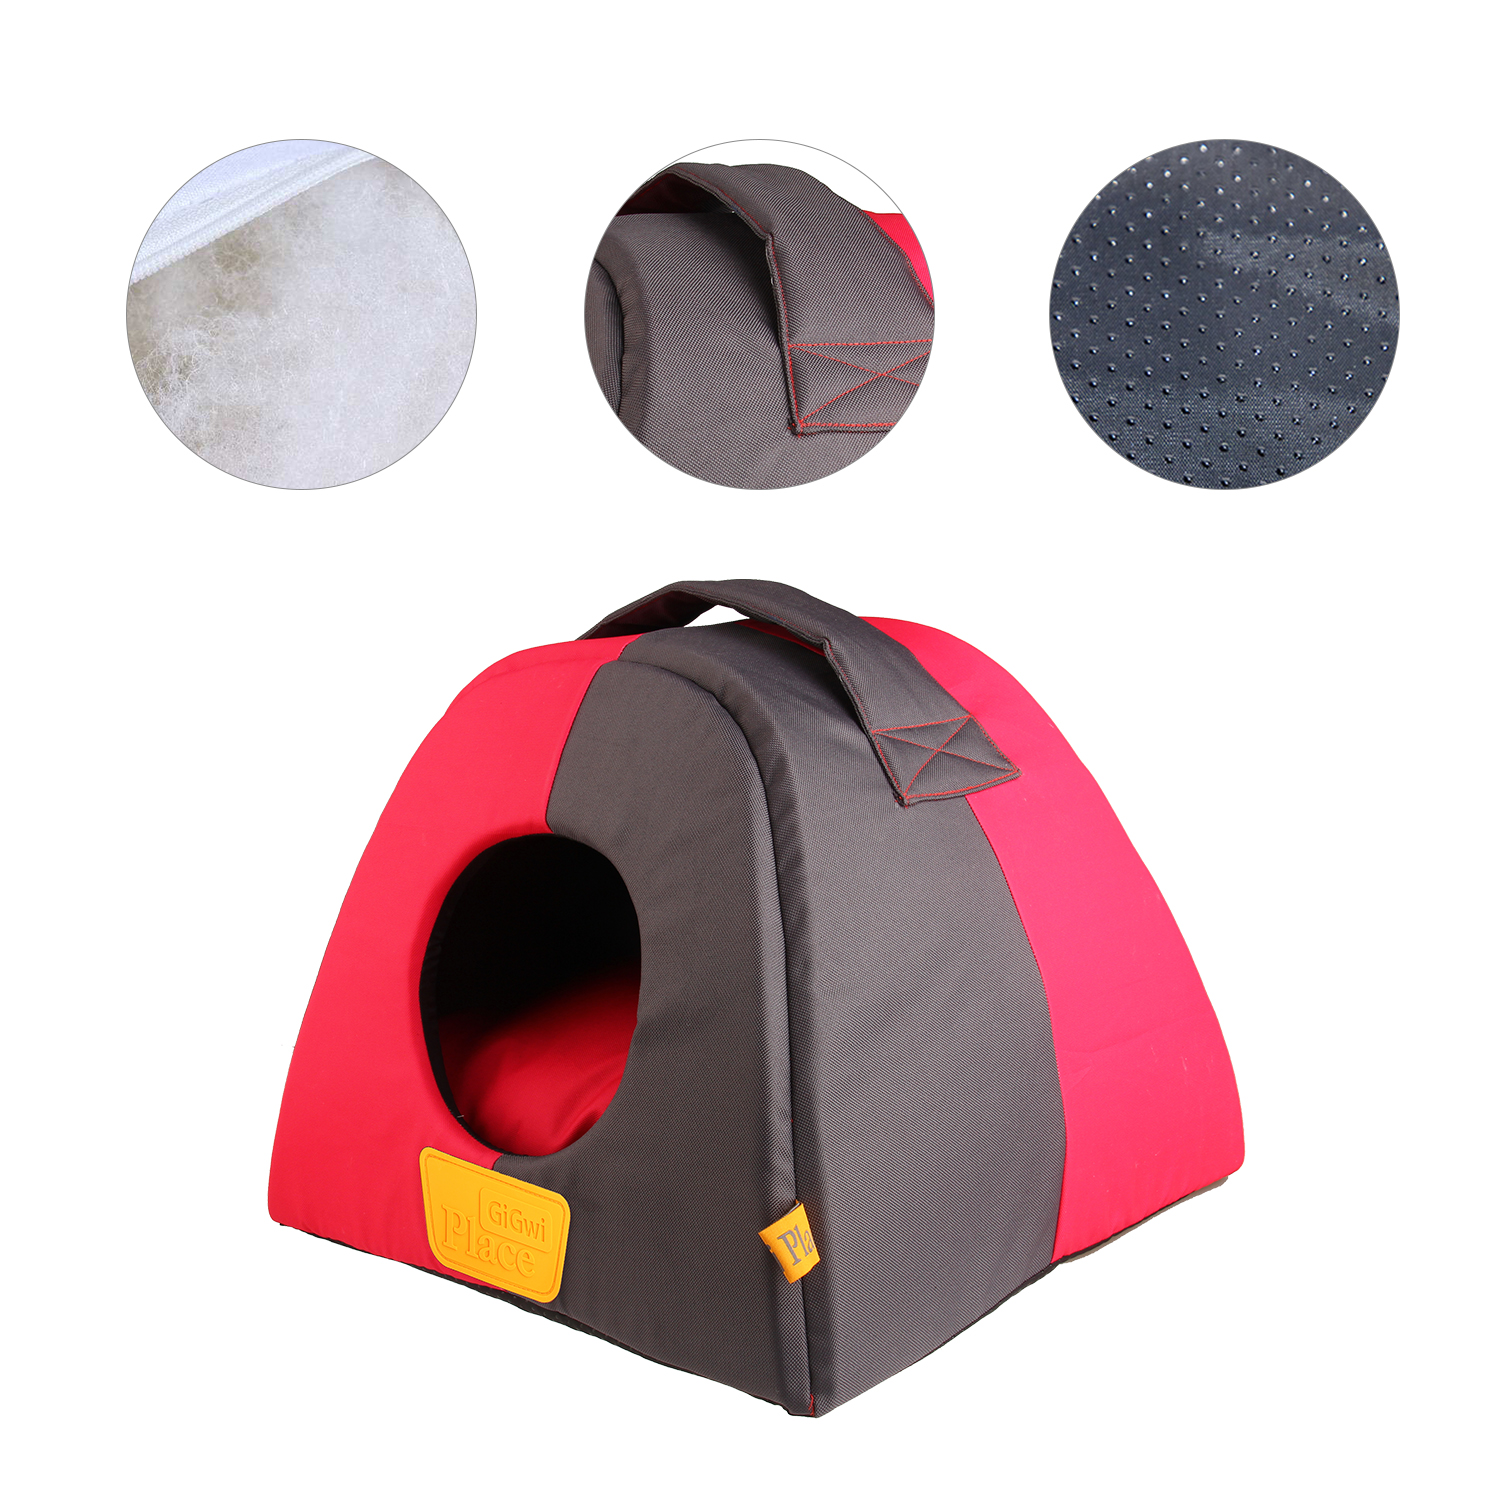 GiG Place Cubby Pet House Durable Oxford Fabric Breathable Waterproof Pet Bed